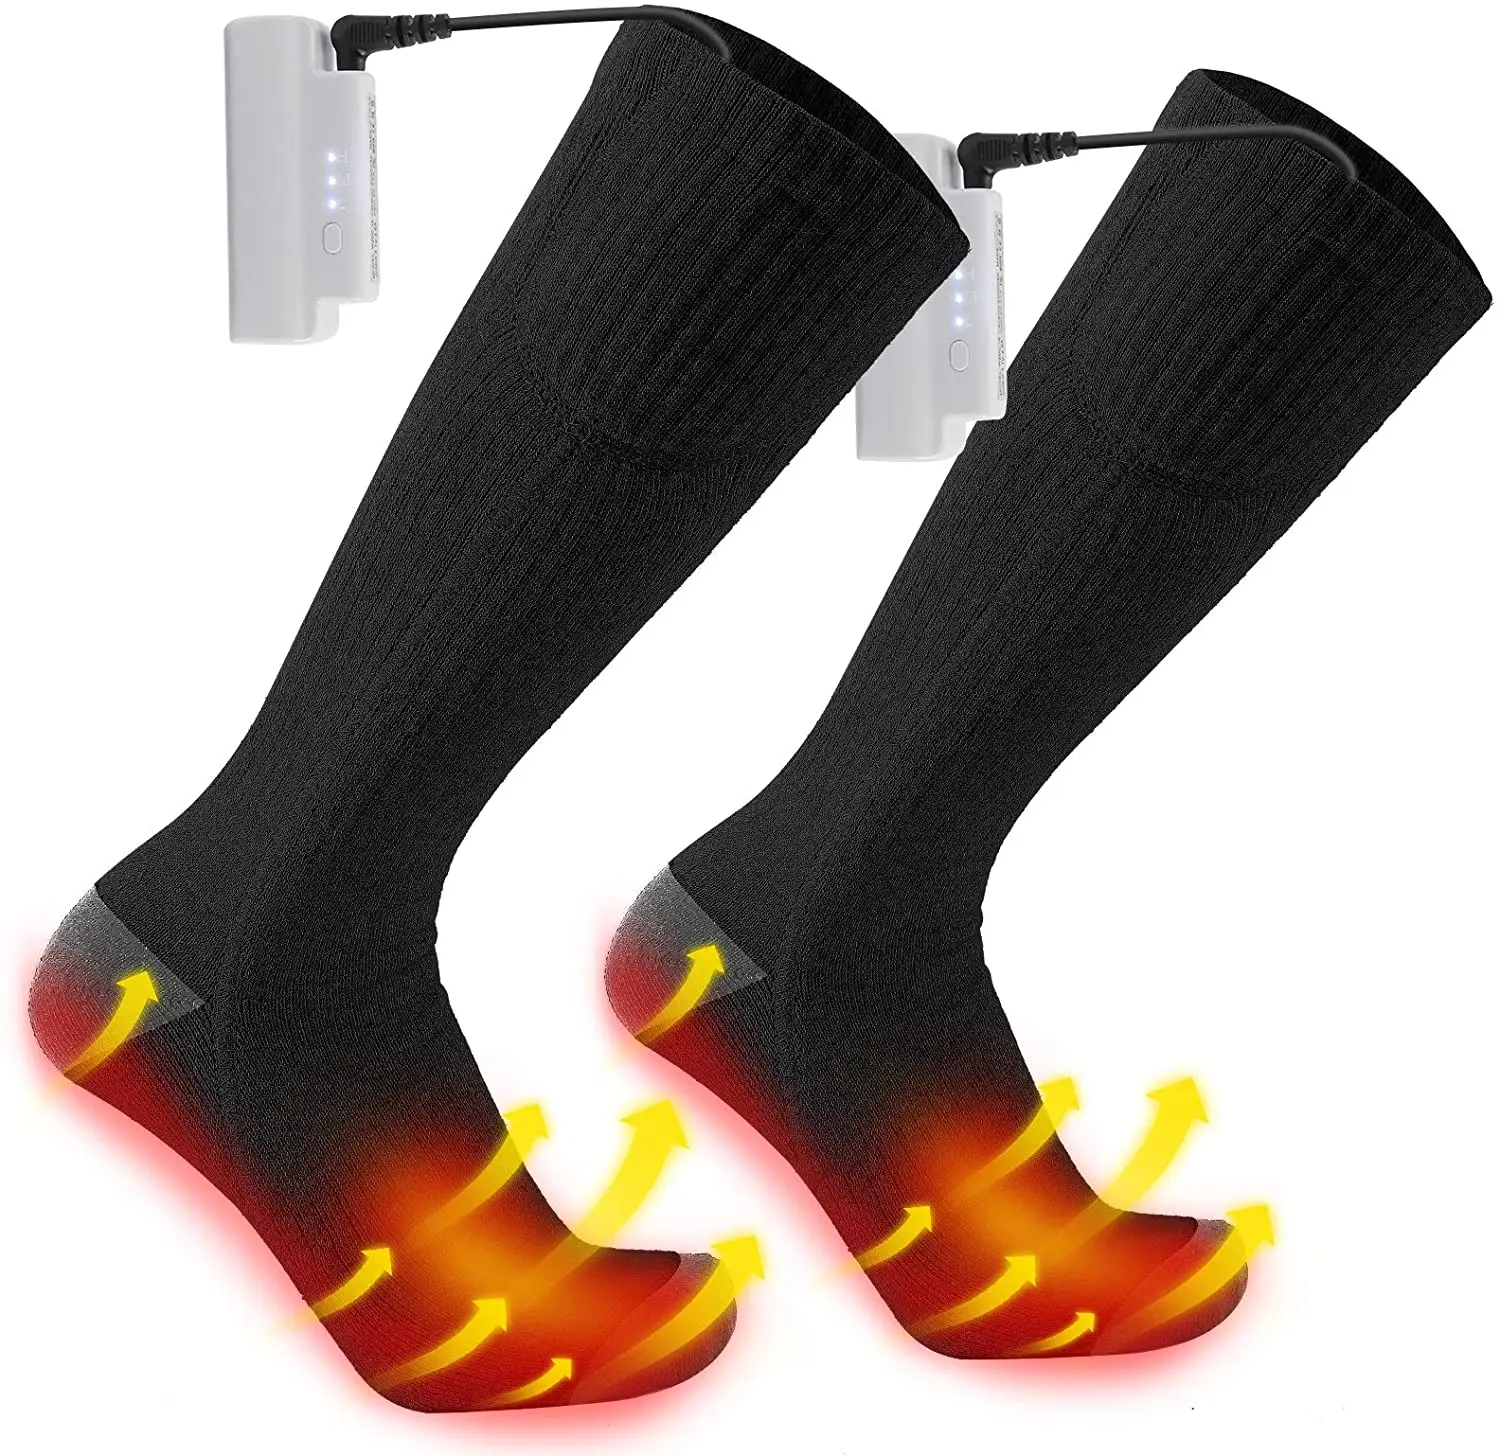 Electric Heated Socks Rechargeable Battery Feet Winter Warm Thermal Socks USA 